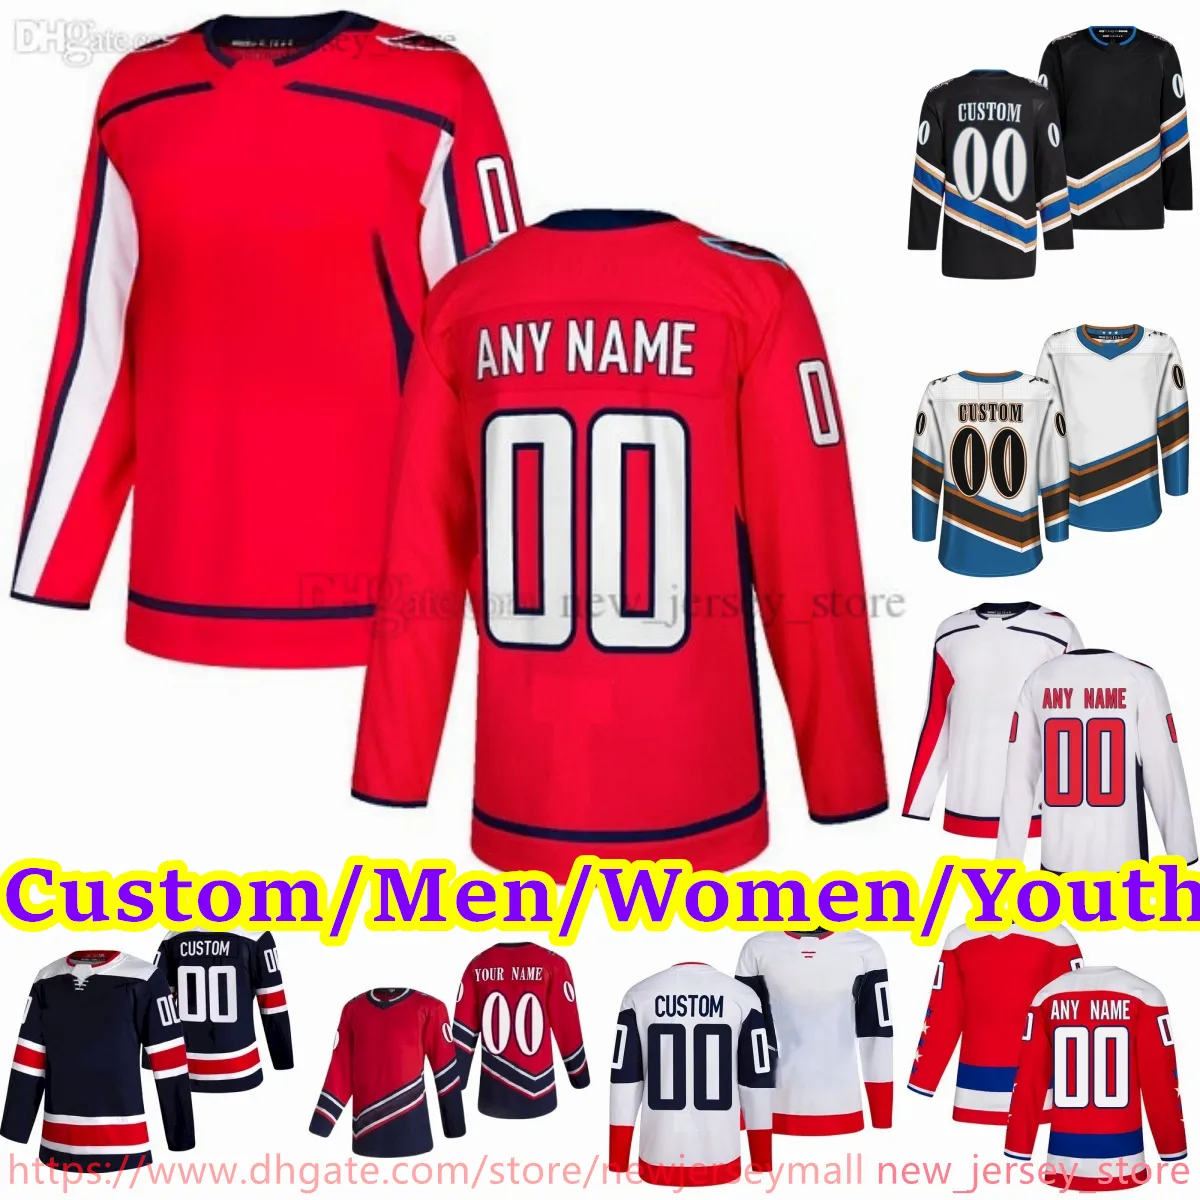 alex ovechkin jersey youth